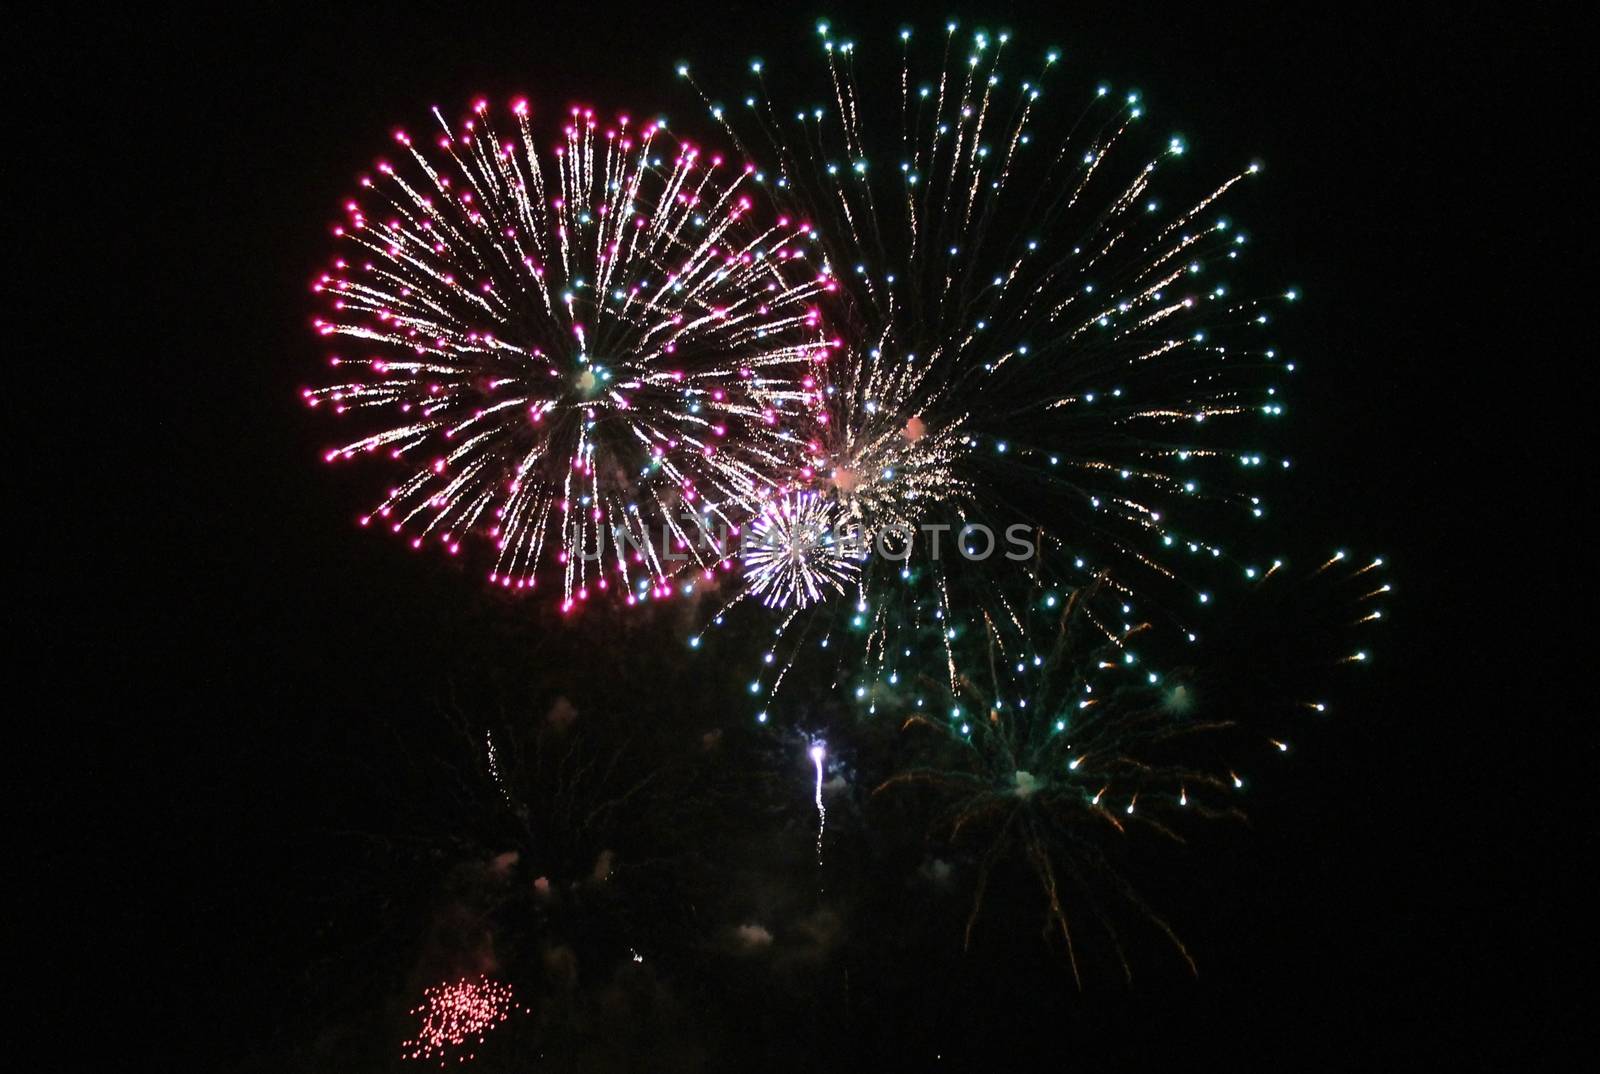 Fireworks light up the sky with dazzling display by cheekylorns